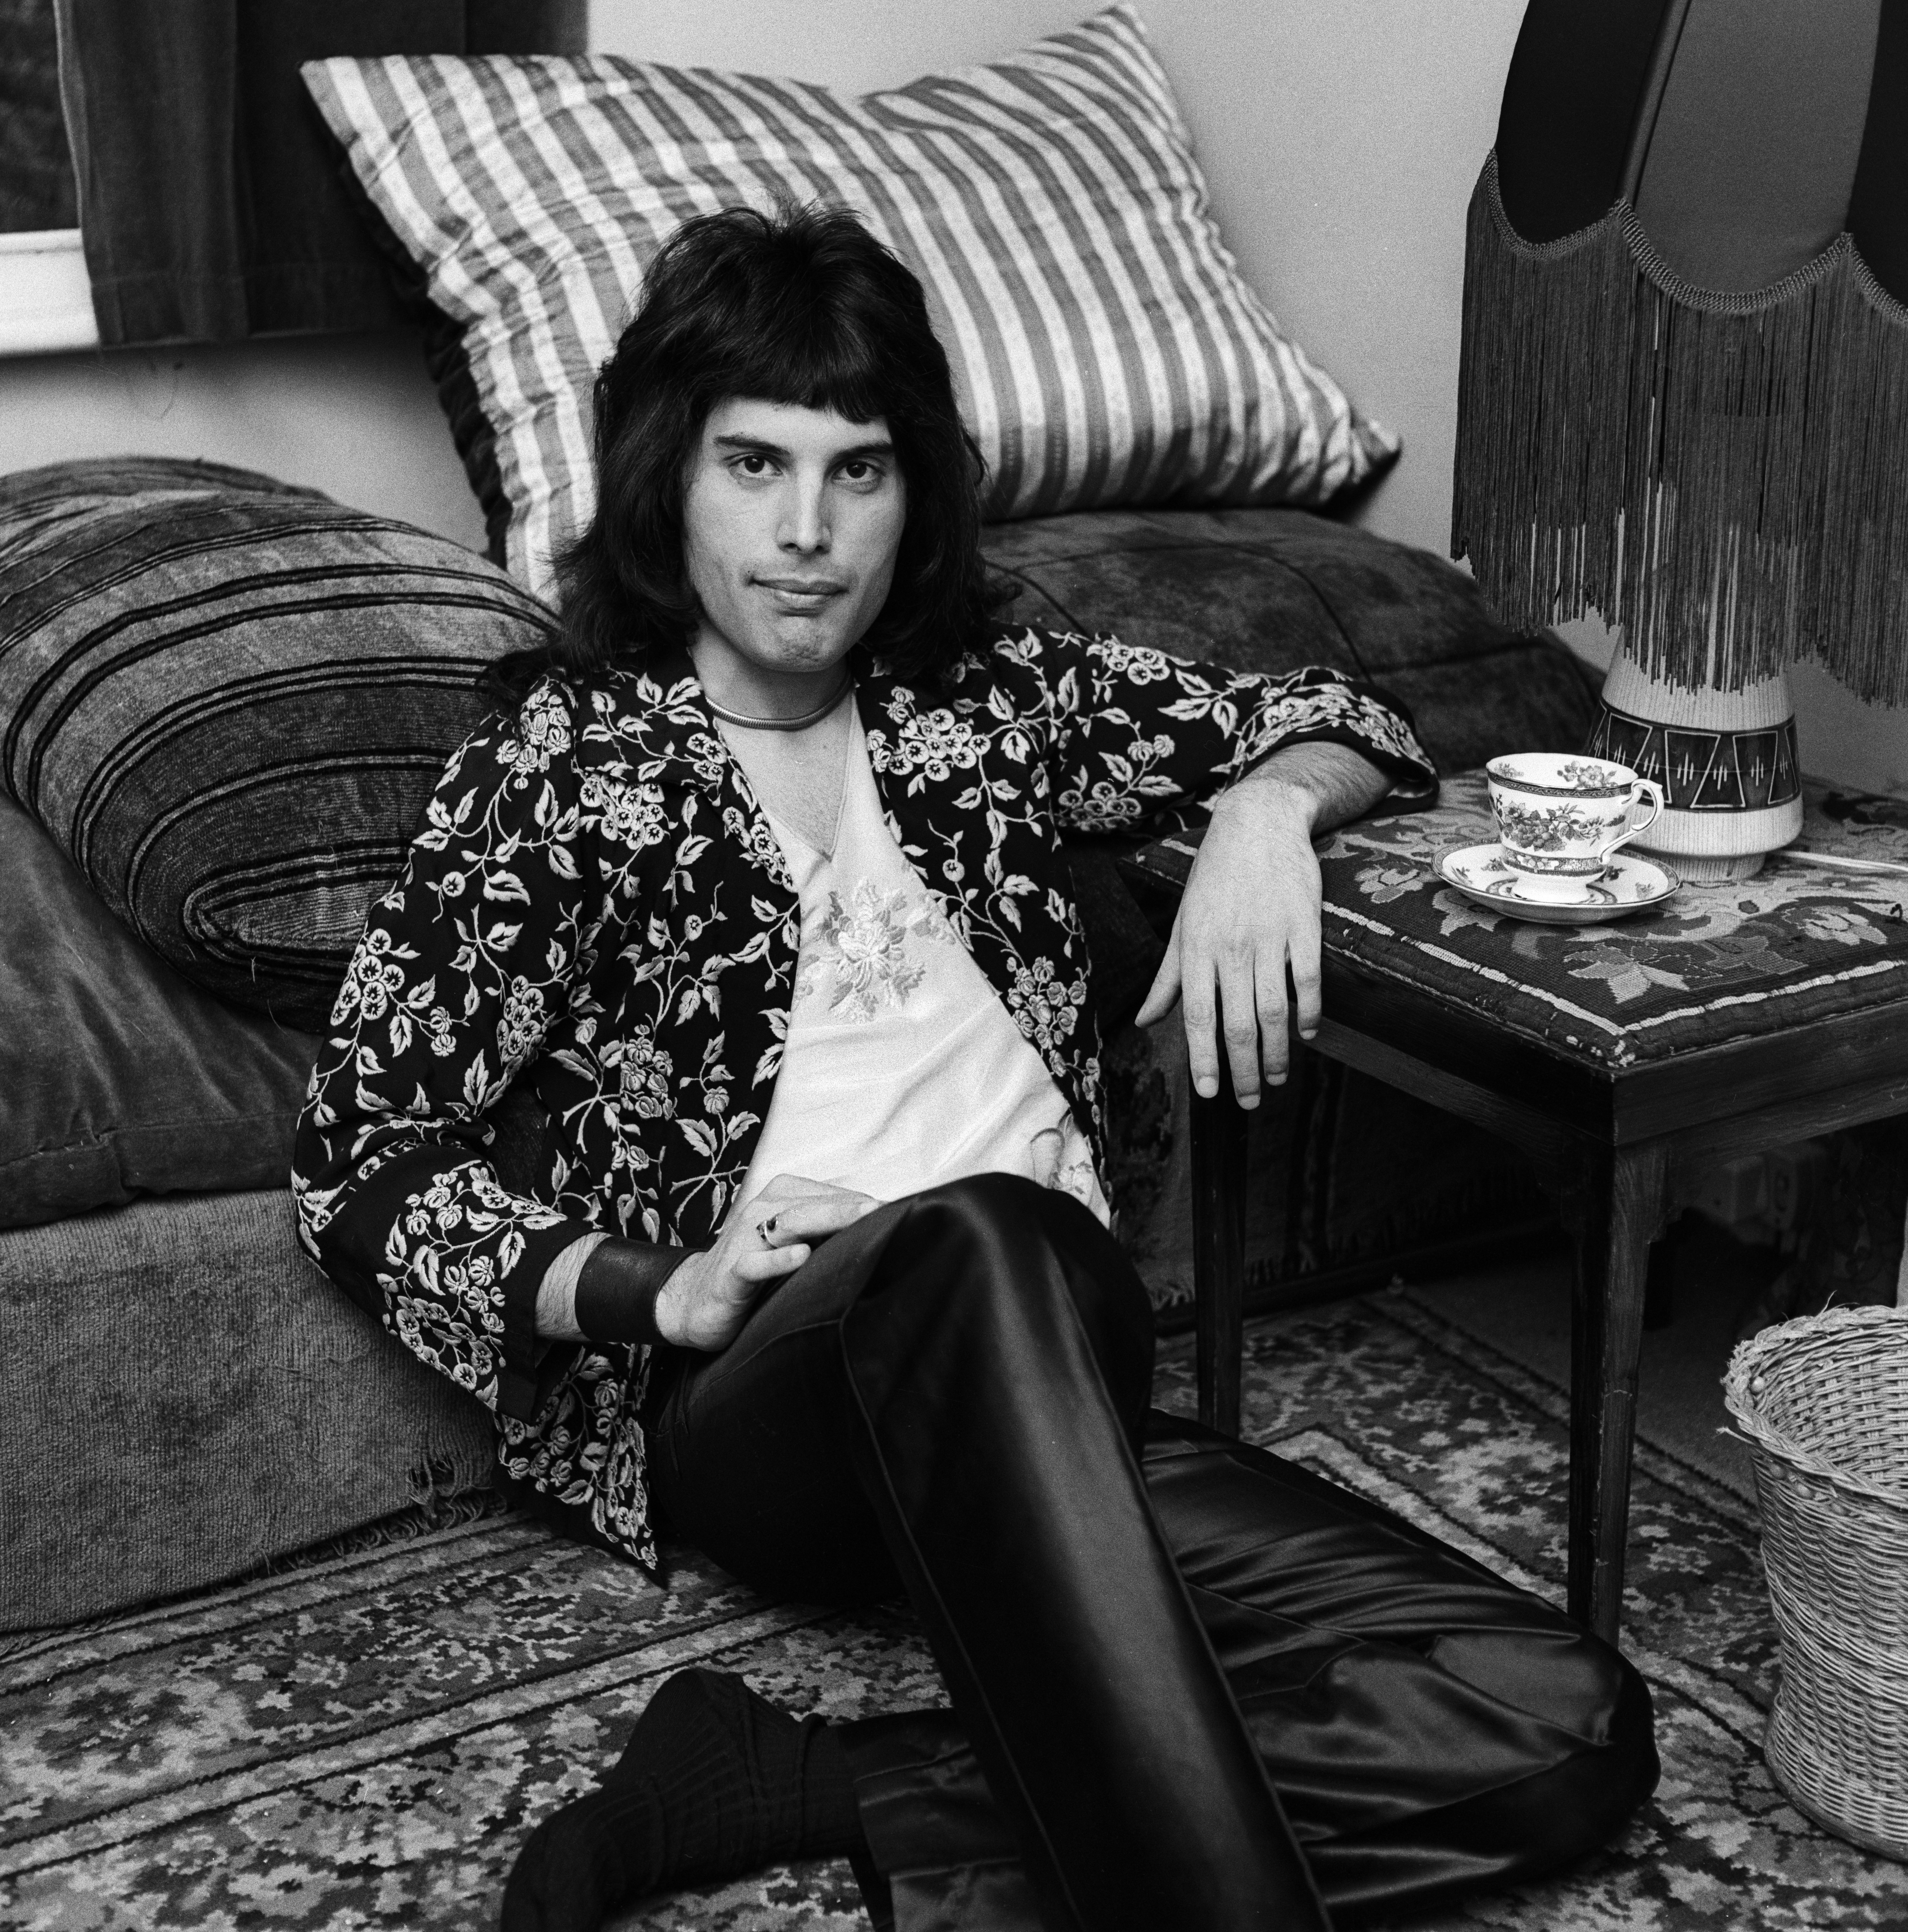 British singer and songwriter Freddie Mercury, lead vocalist of the rock band Queen. August, 1973 | Photo: GettyImages